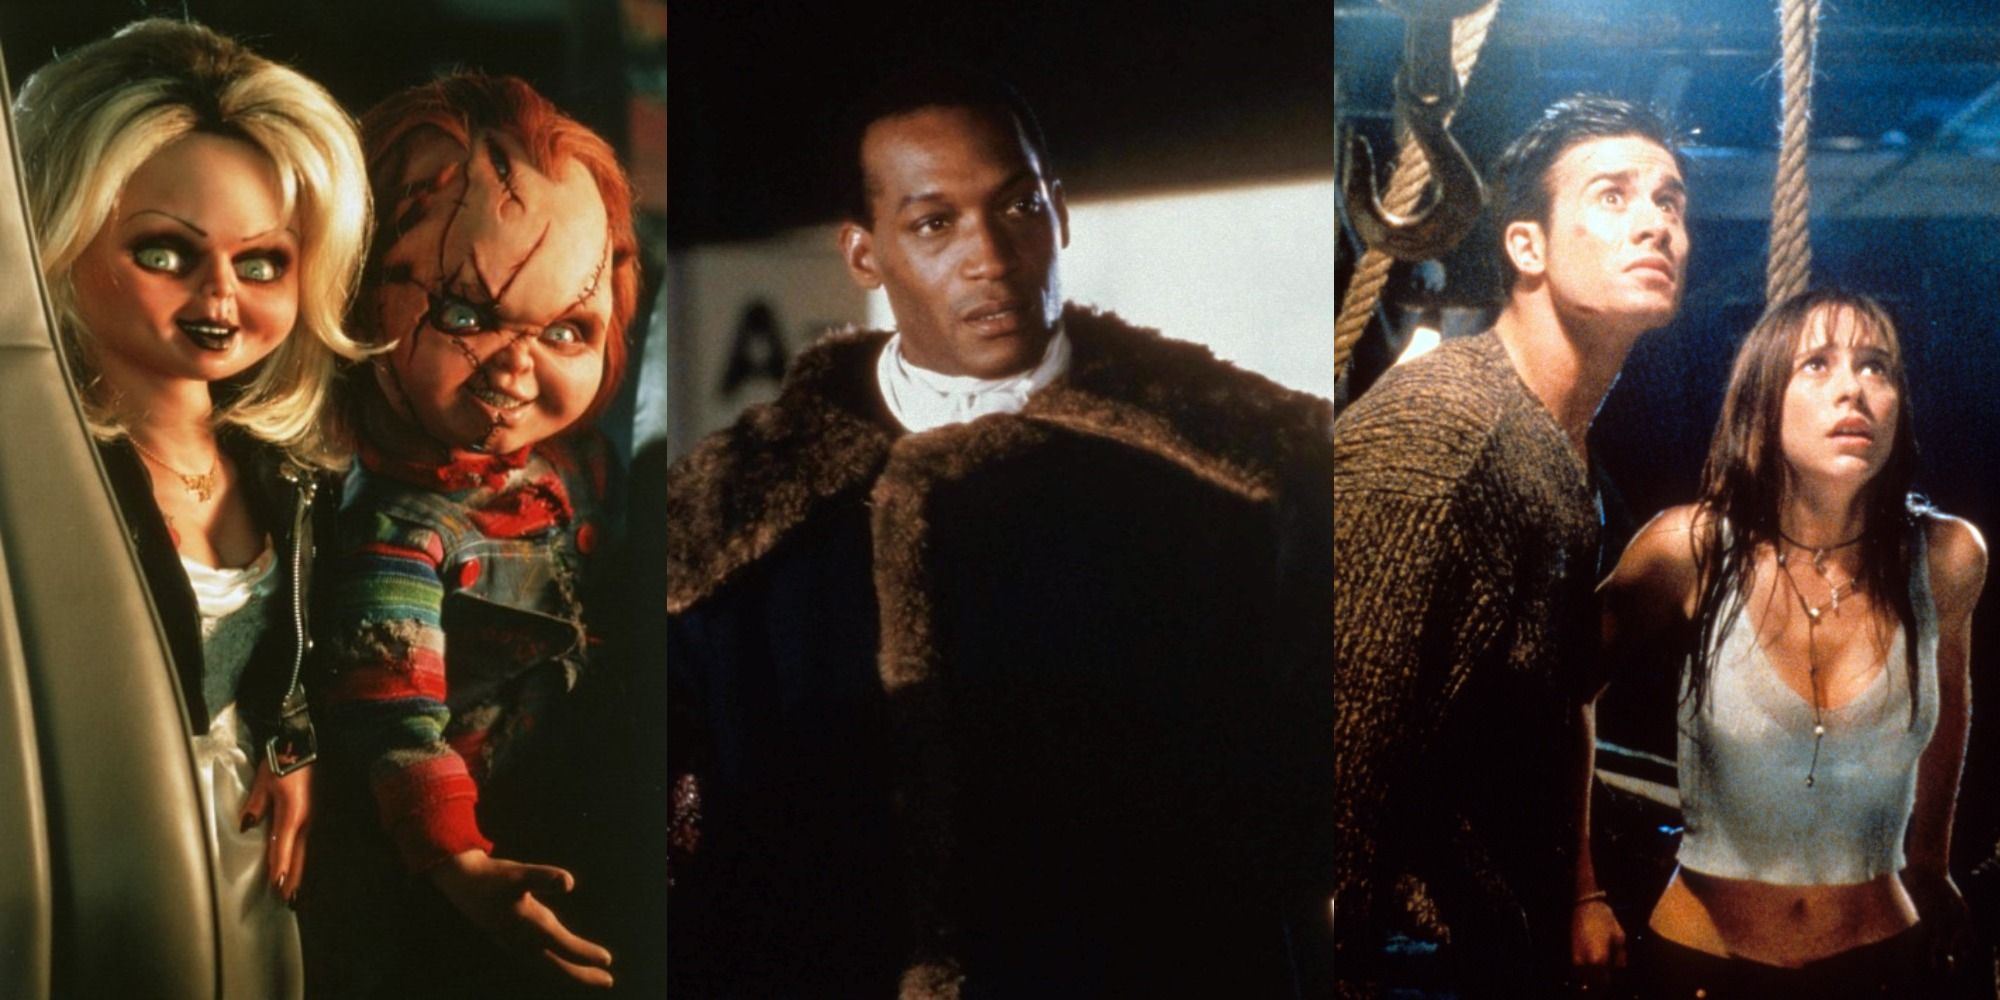 Bride of Chucky, Candyman, and I Know What You Did Last Summer